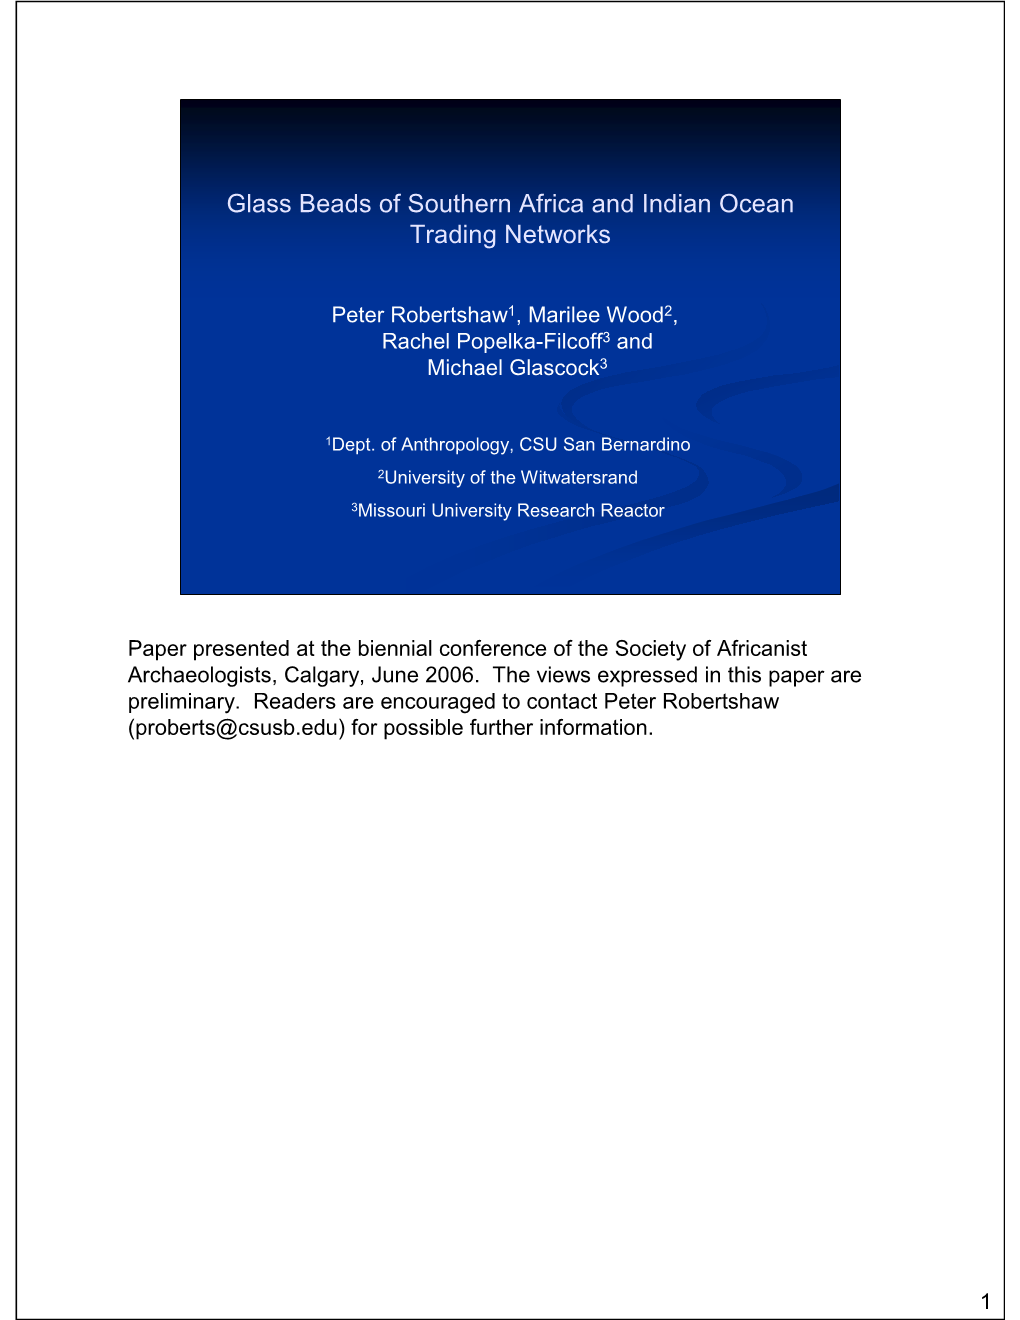 Glass Beads of Southern Africa and Indian Ocean Trading Networks